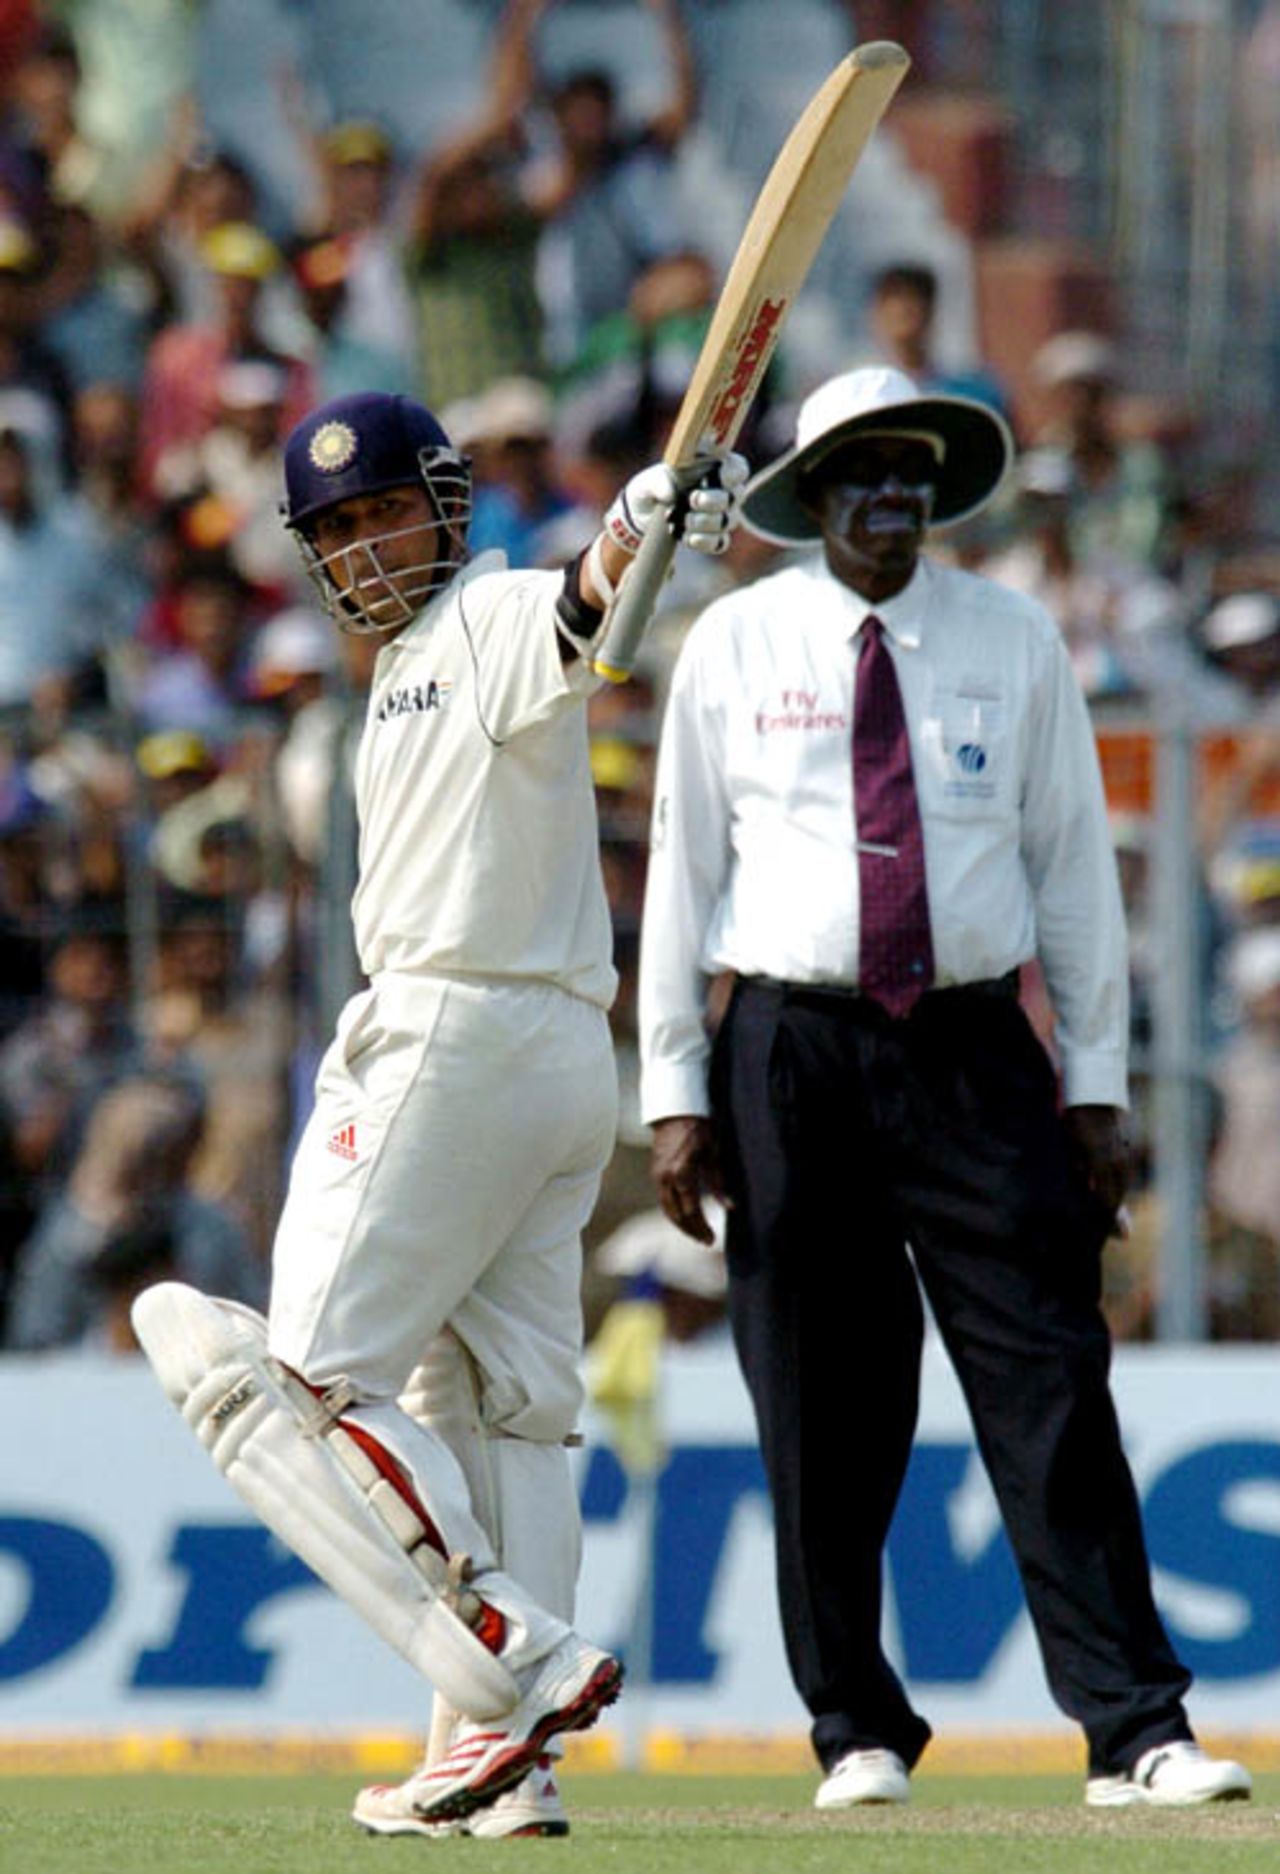 Tendulkar joins the 10000-run club - After missing out at Mohali, when he was dismissed 27 runs short of the 10000-run milestone, Tendulkar made sure he gave his fans an opportunity to celebrate. When he nudged a Abdul Razzaq delivery off his pads to long leg and pinched a single, he became the second Indian and the fifth man in test history to score 10000-test runs or more, 2nd Test: India v Pakistan at Kolkata, 16-20 Mar 2005